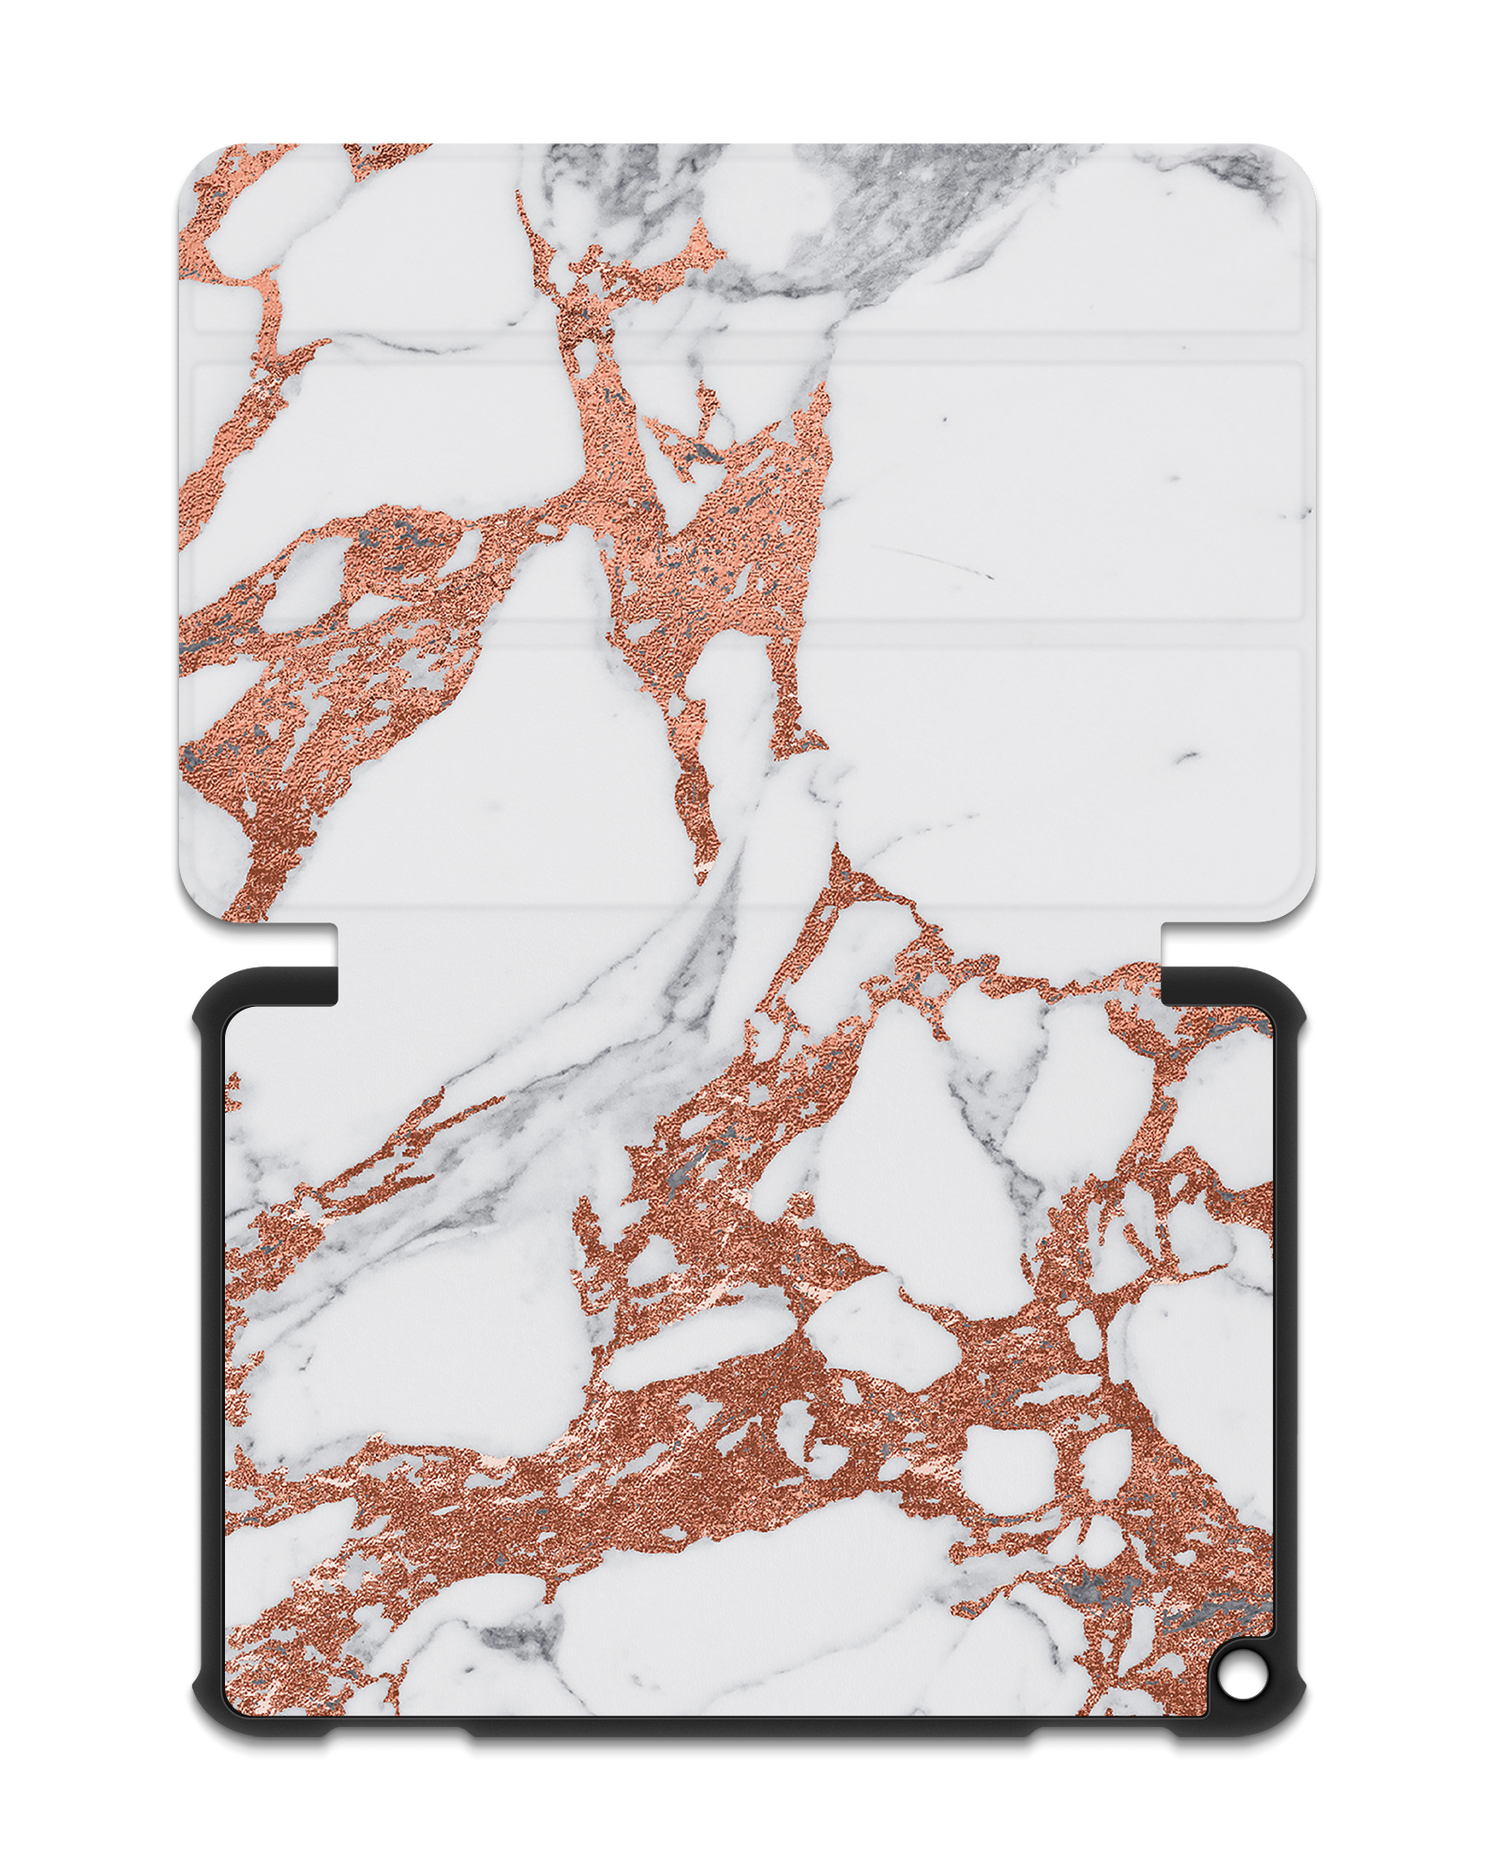 Marble Mix Tablet Smart Case for Amazon Fire HD 8 (2022), Amazon Fire HD 8 Plus (2022), Amazon Fire HD 8 (2020), Amazon Fire HD 8 Plus (2020): Opened